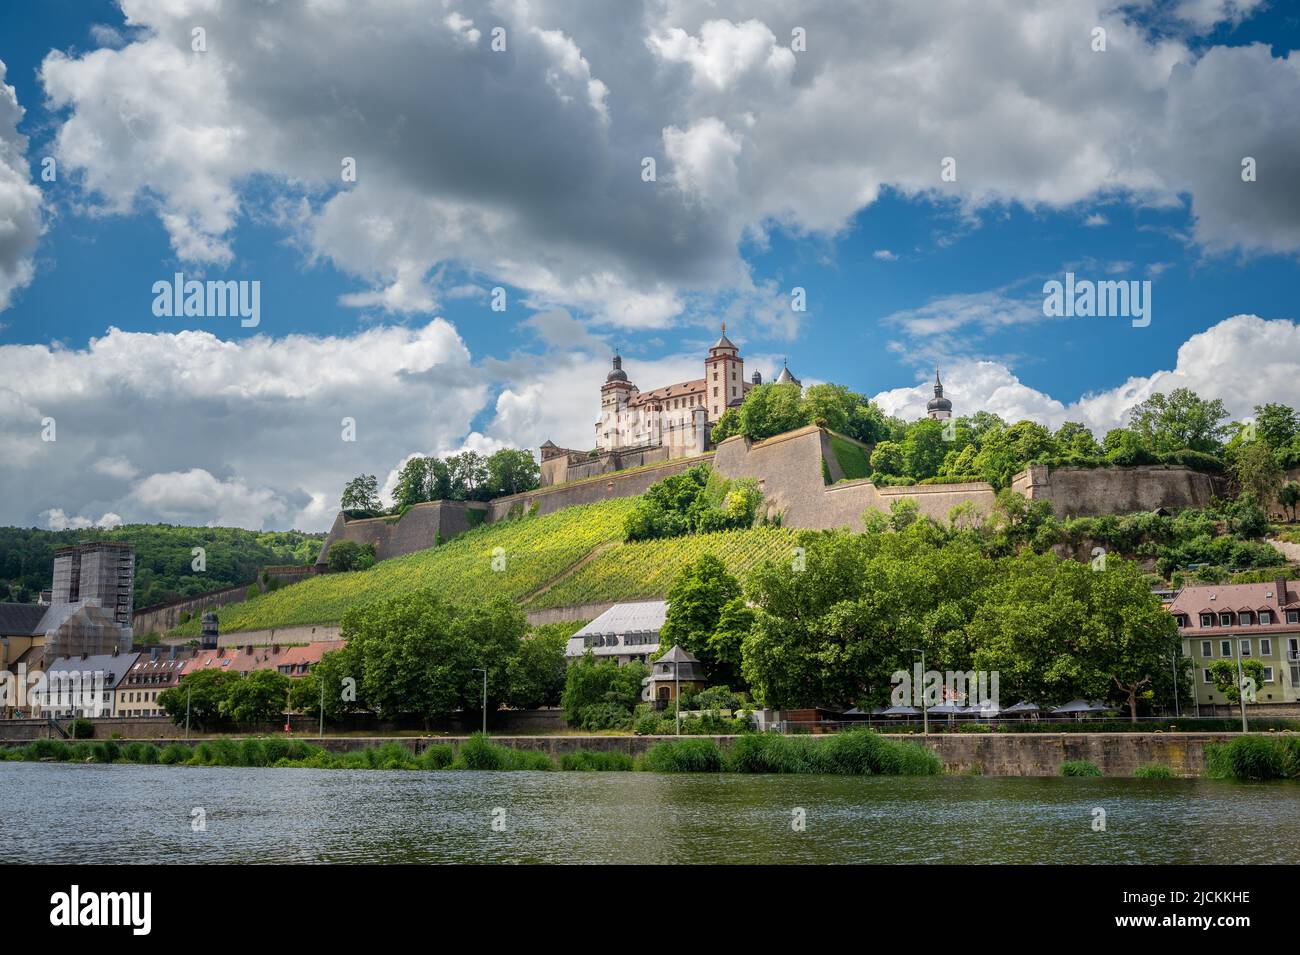 Cityscape of Würzburg with Fortress and Main River, Germany Stock Photo